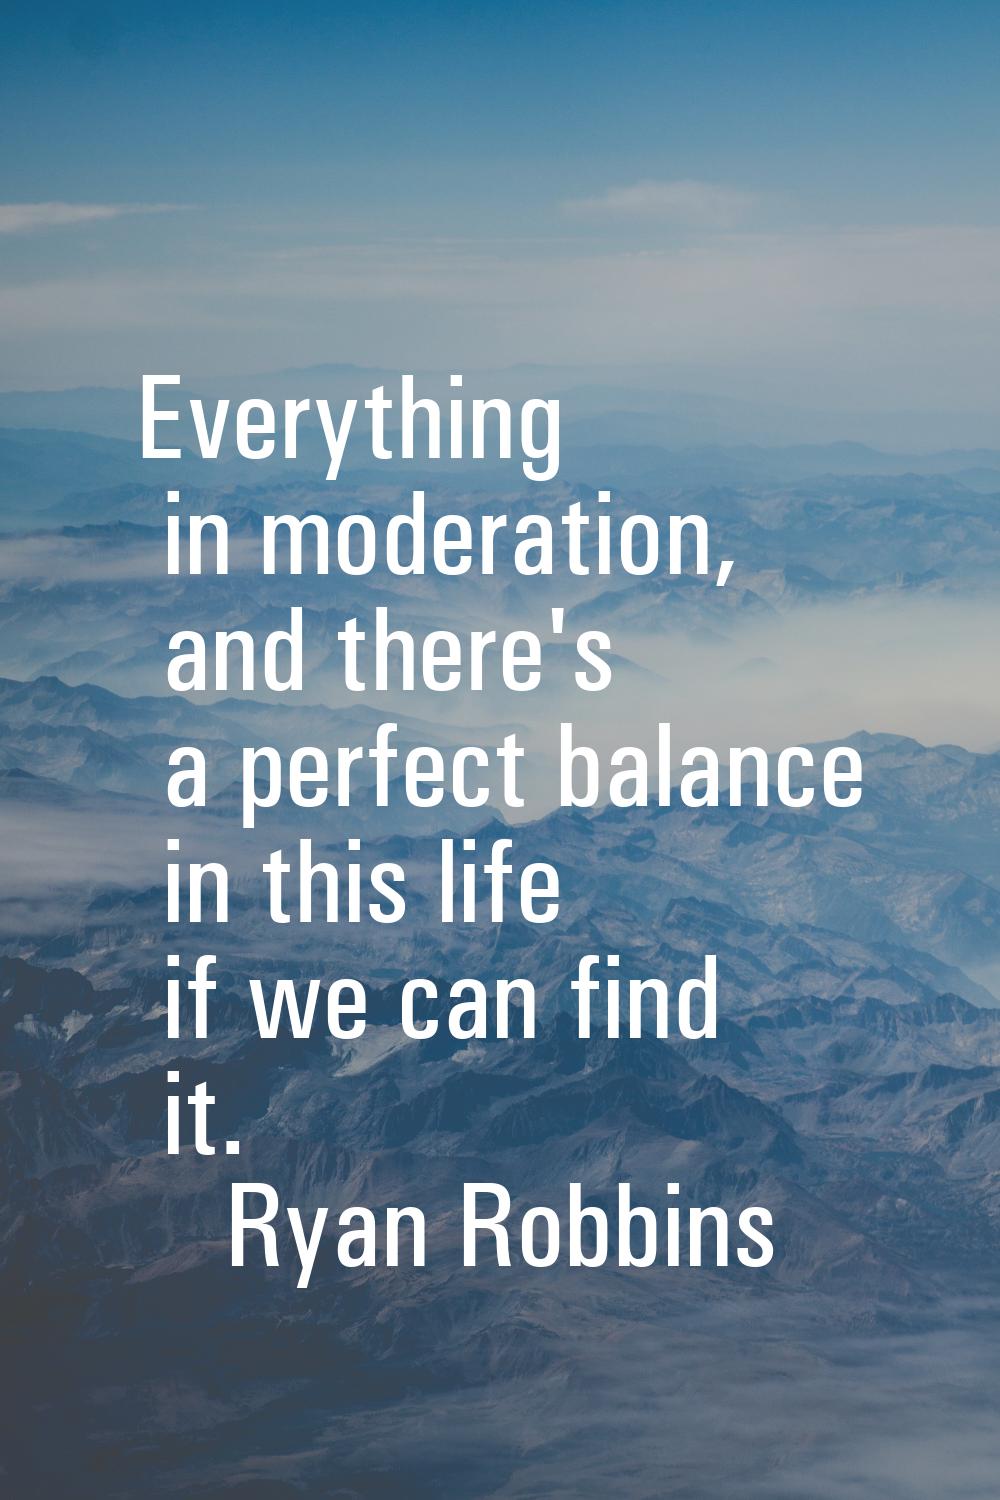 Everything in moderation, and there's a perfect balance in this life if we can find it.